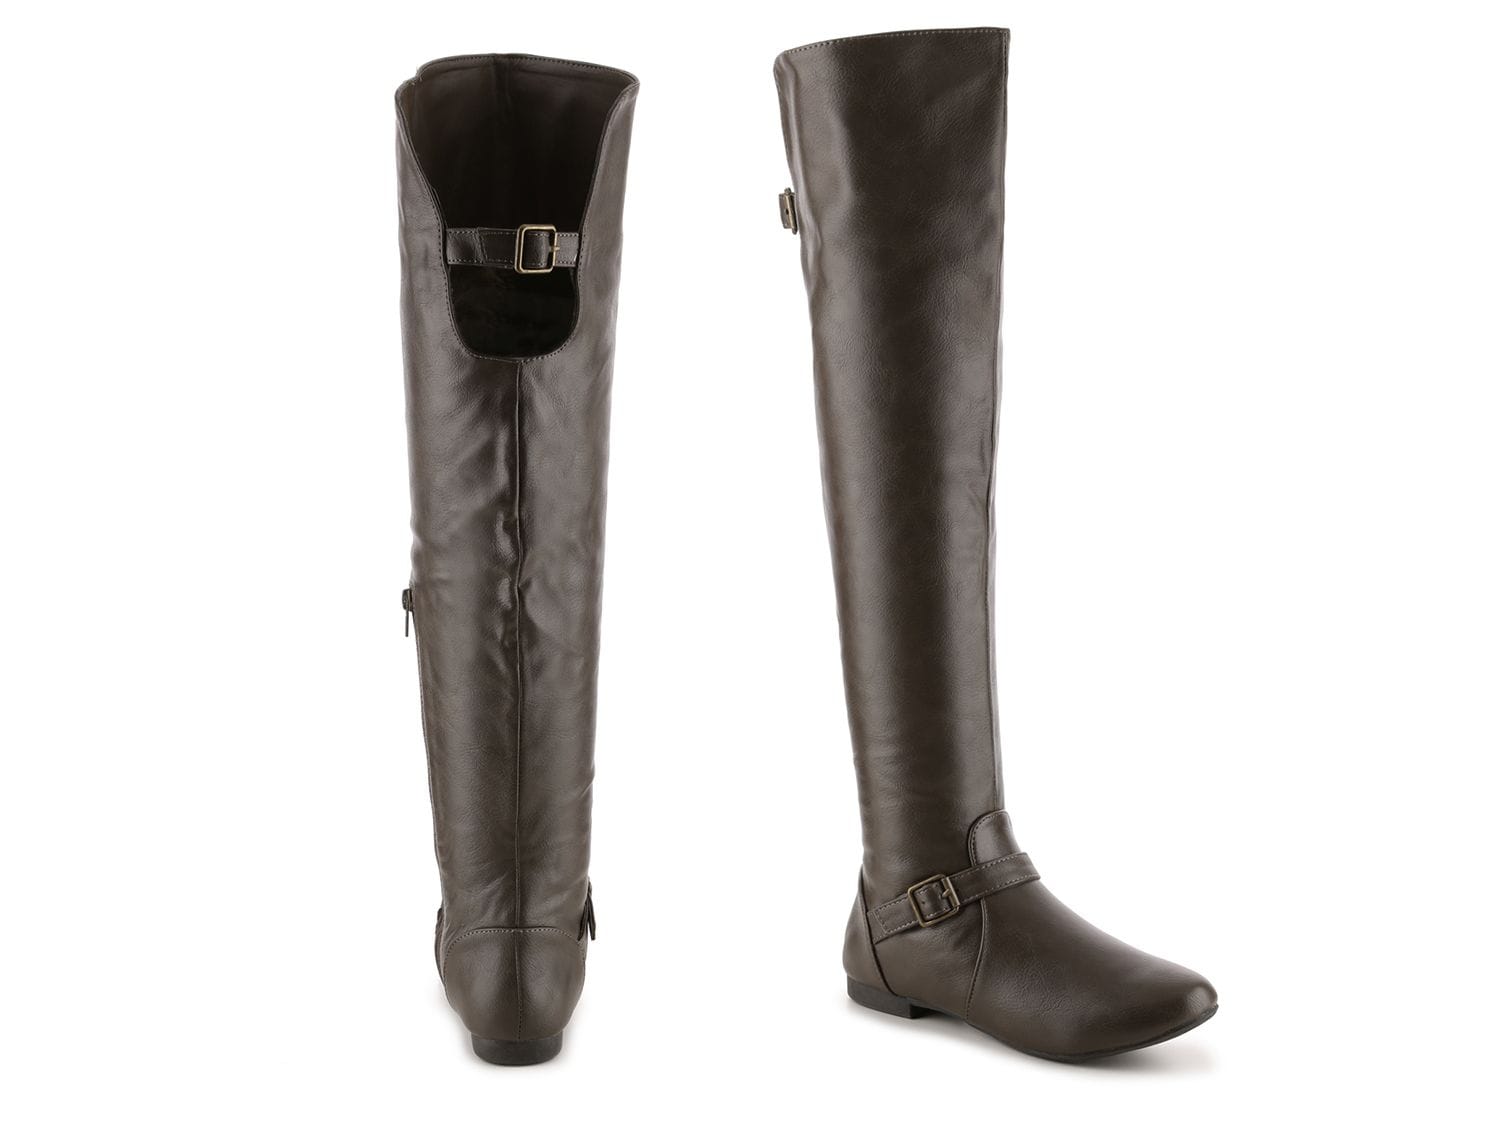 journee collection angel over the knee boot